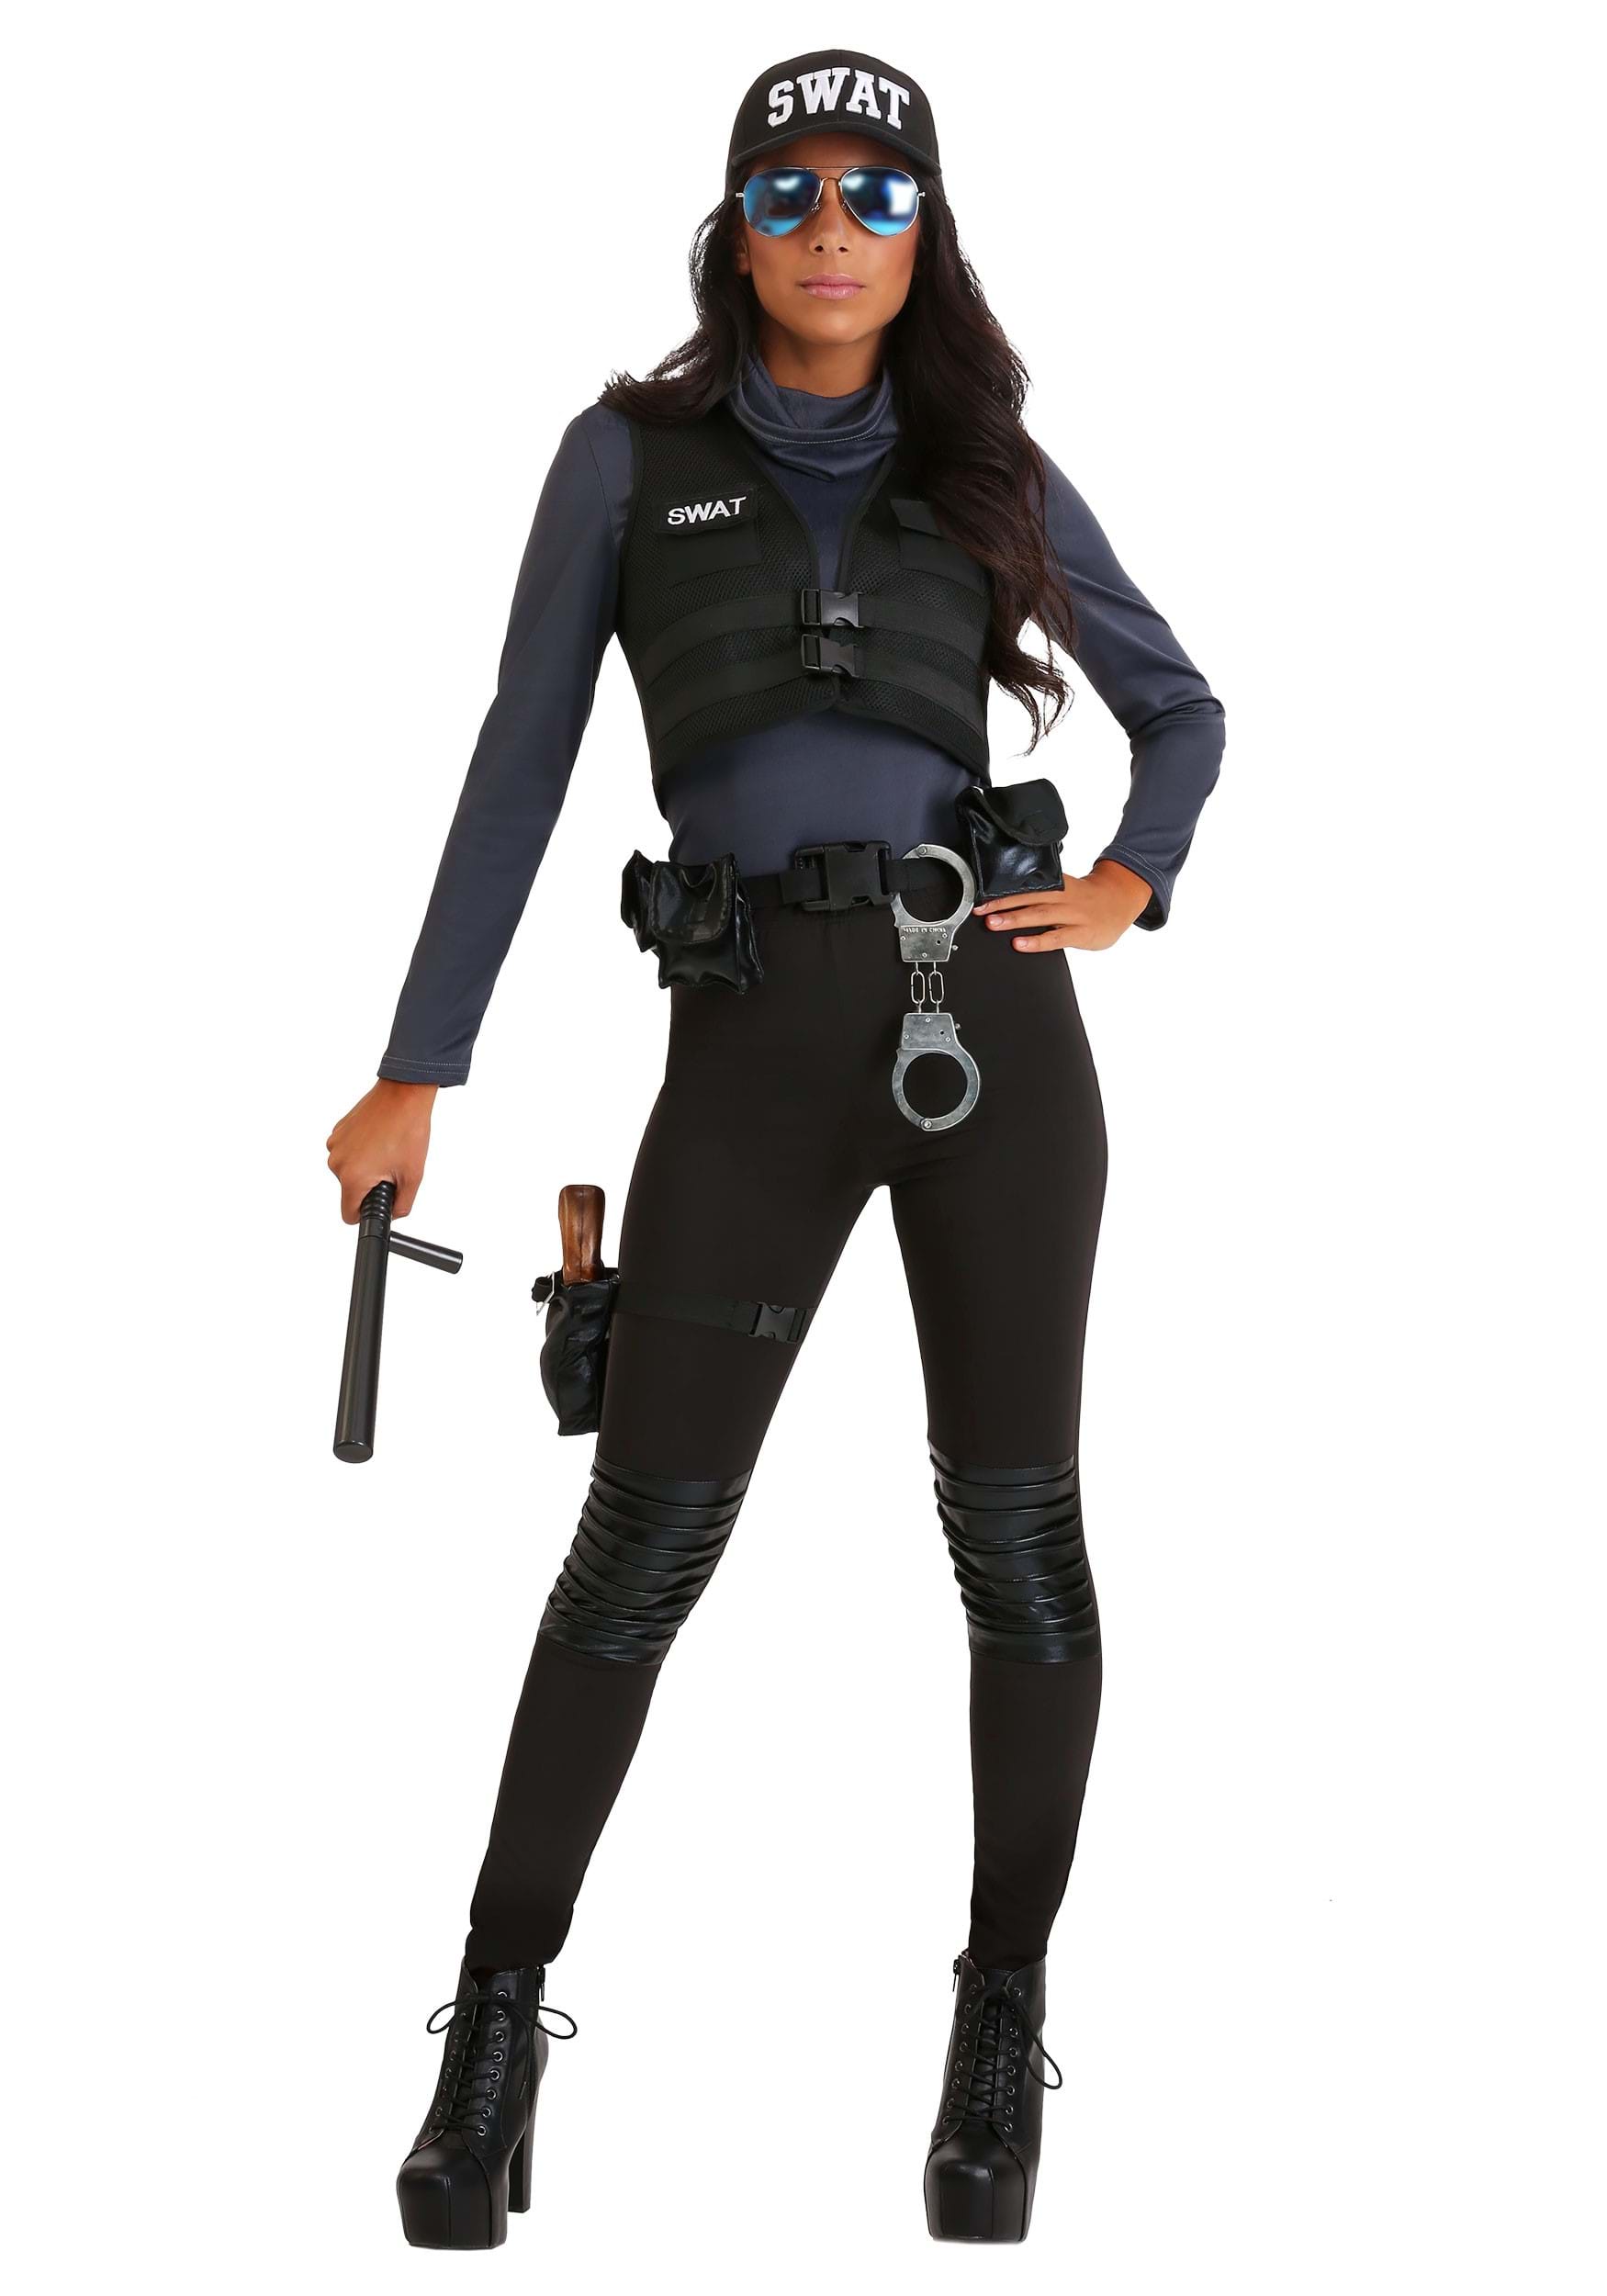 https://images.halloweencostumes.com/products/44985/1-1/swat-babe-womens-costume.jpg